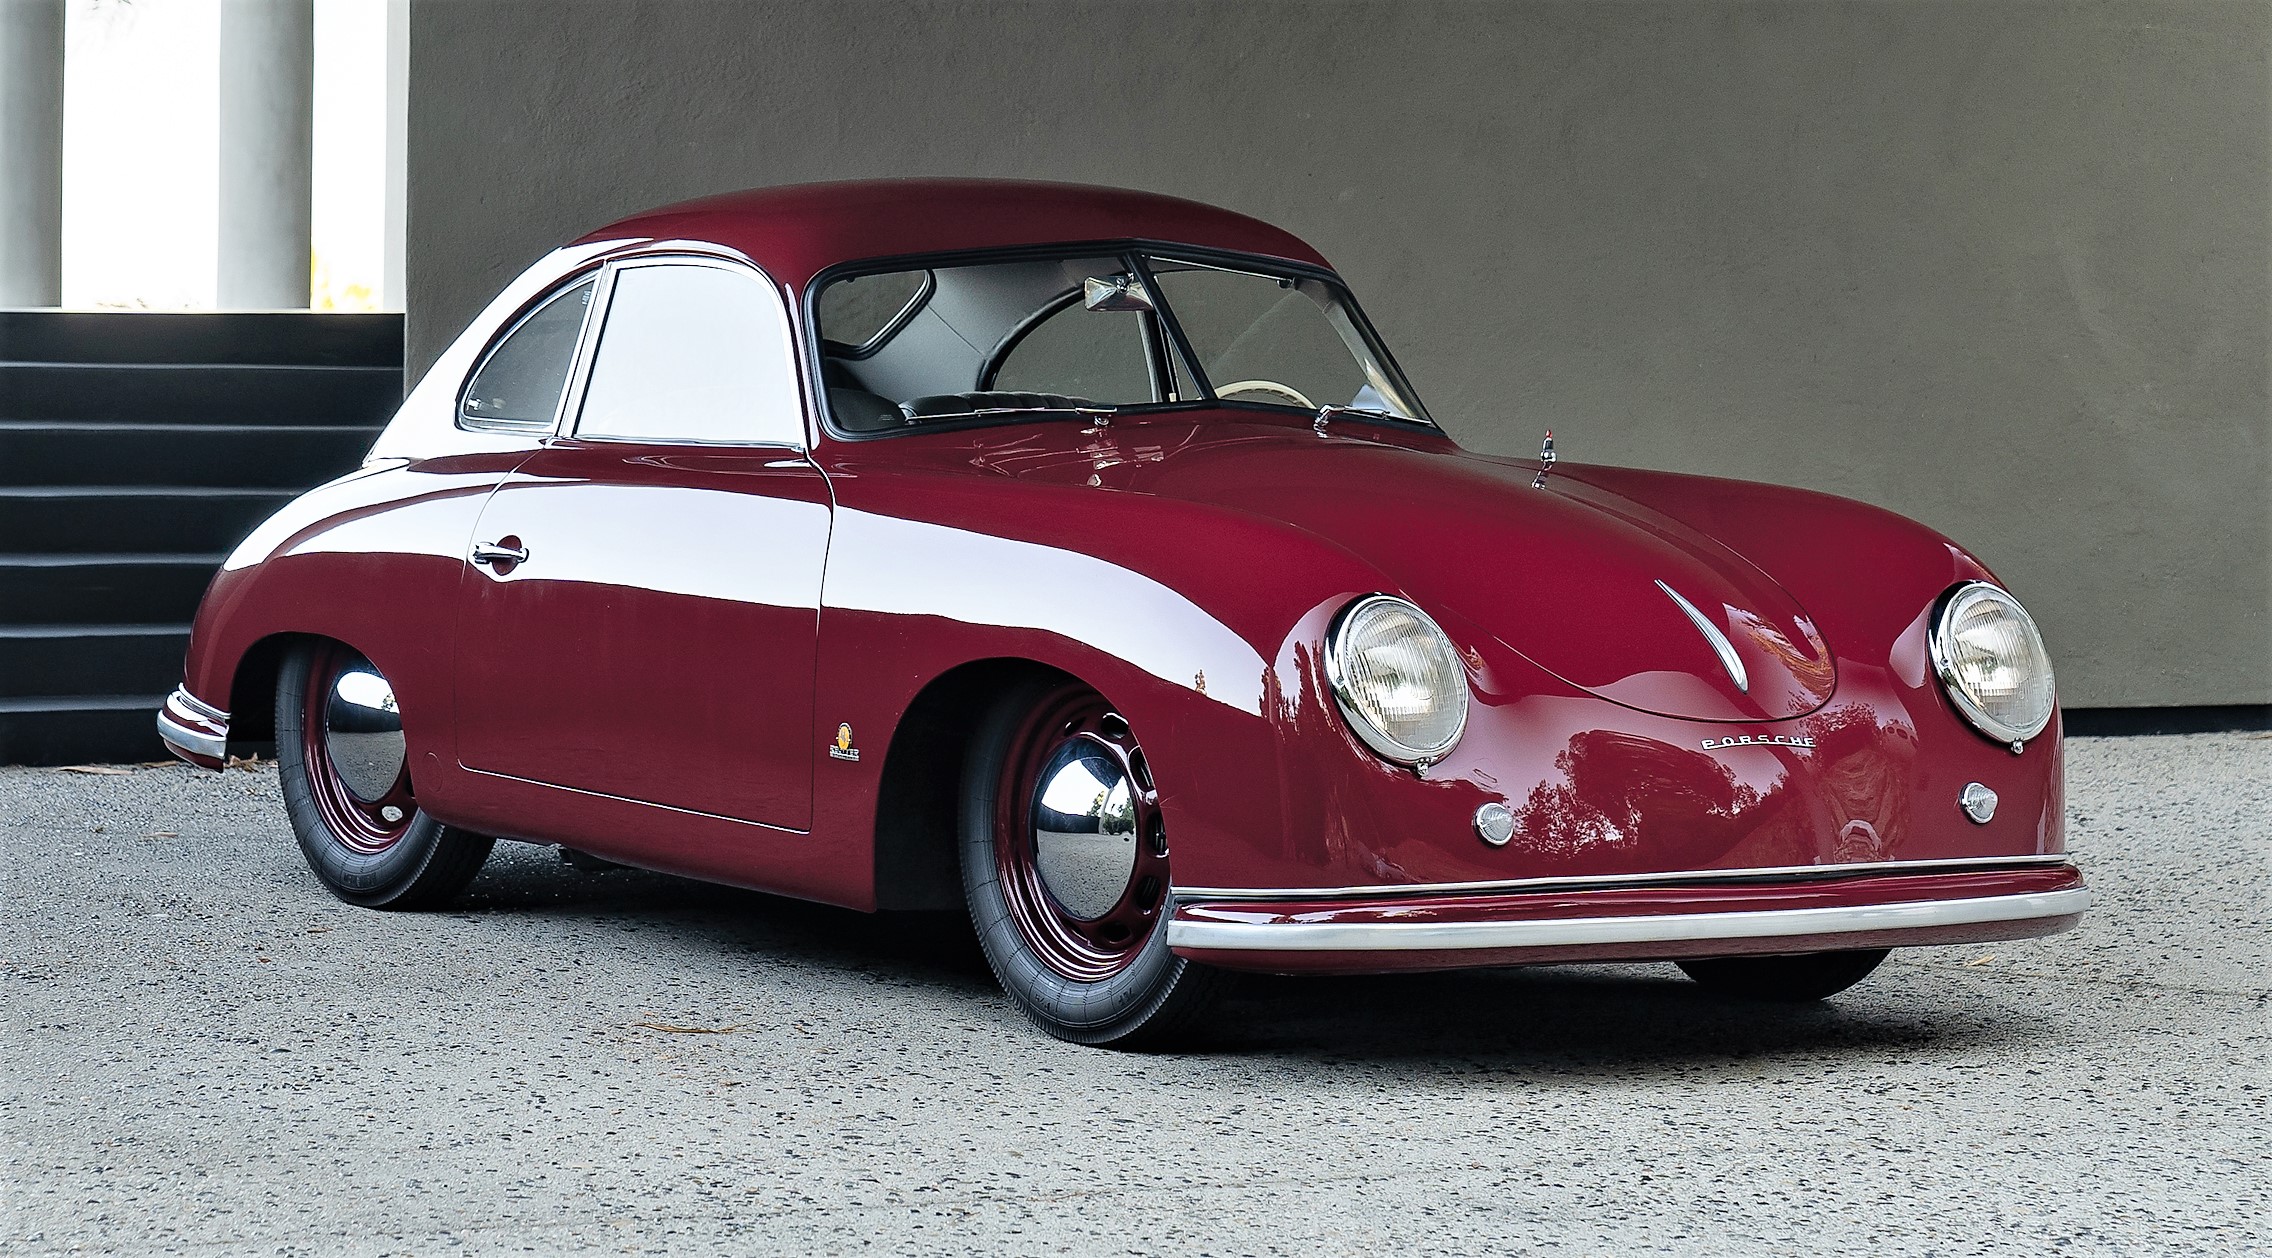 Porsche, Cars from 7 decades of Porsche offered in RM Sotheby’s sale, ClassicCars.com Journal